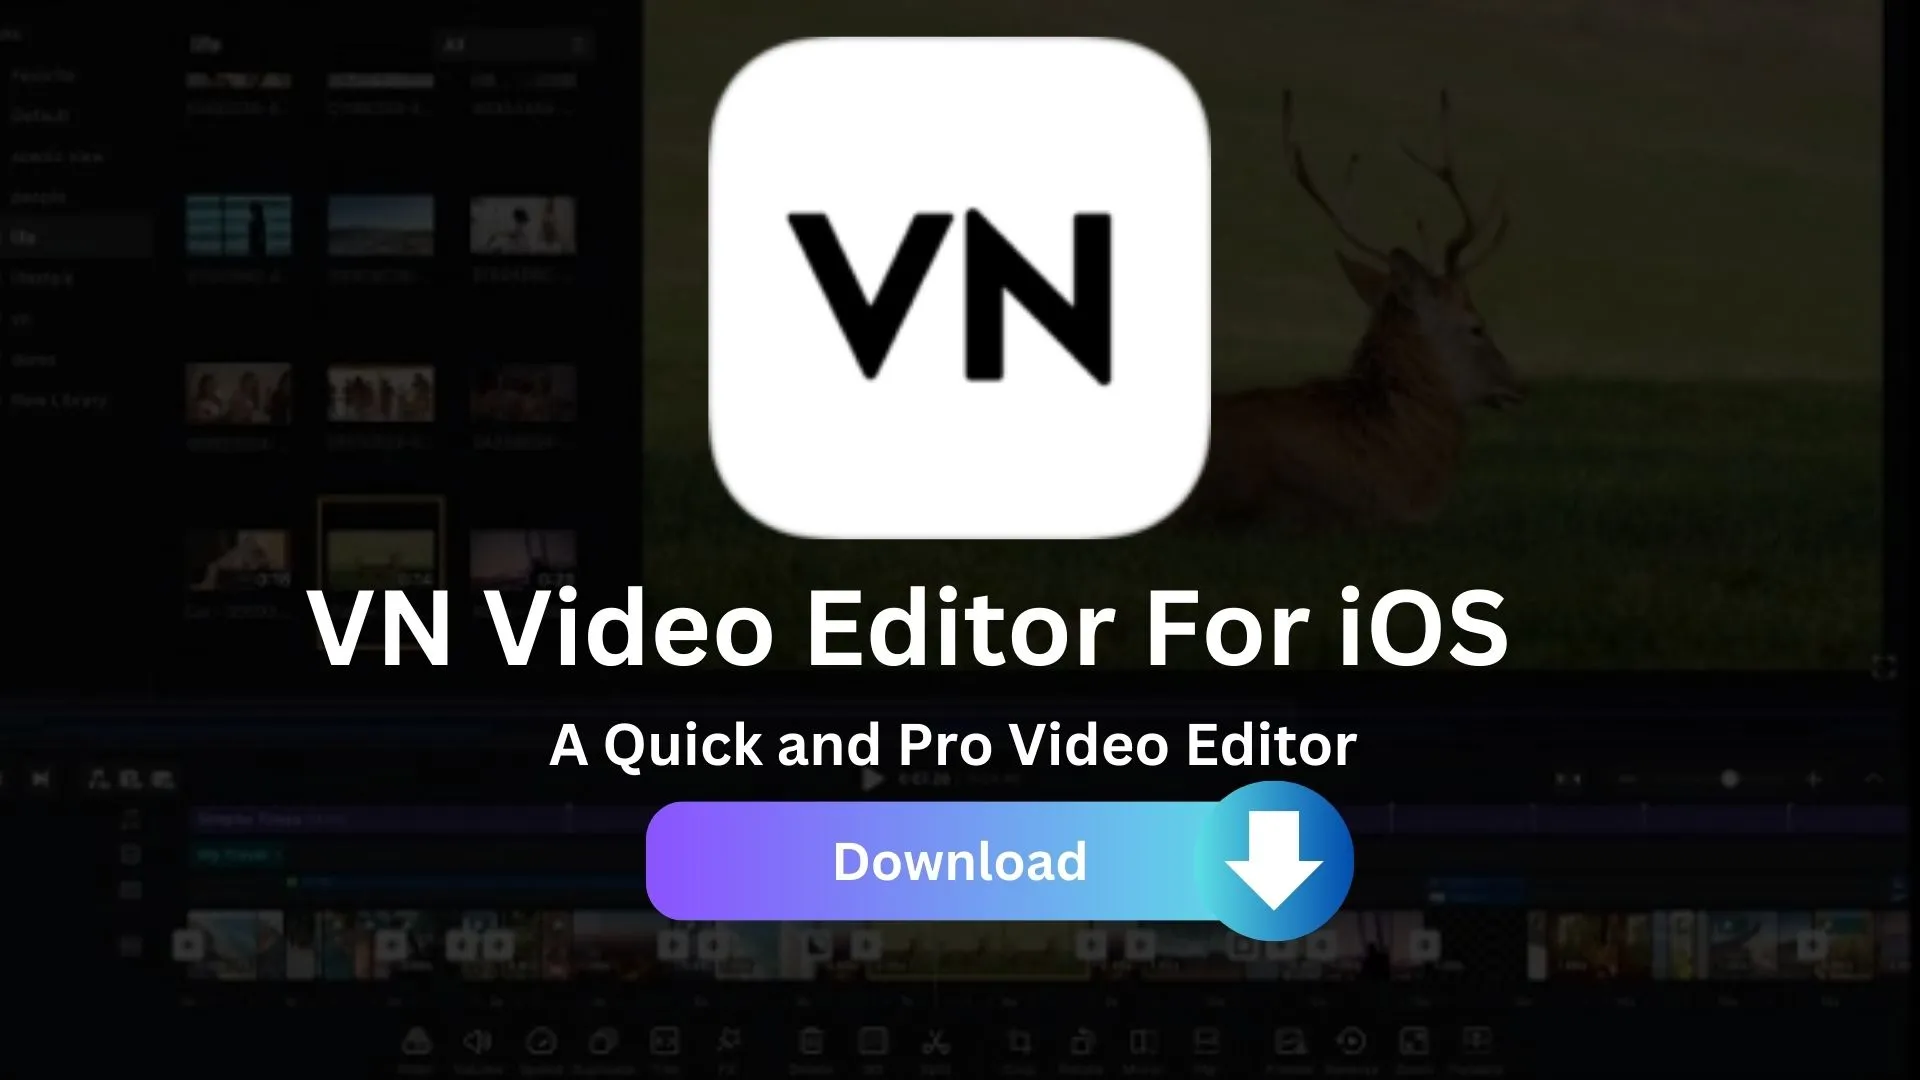 VN Video Editor For iOS